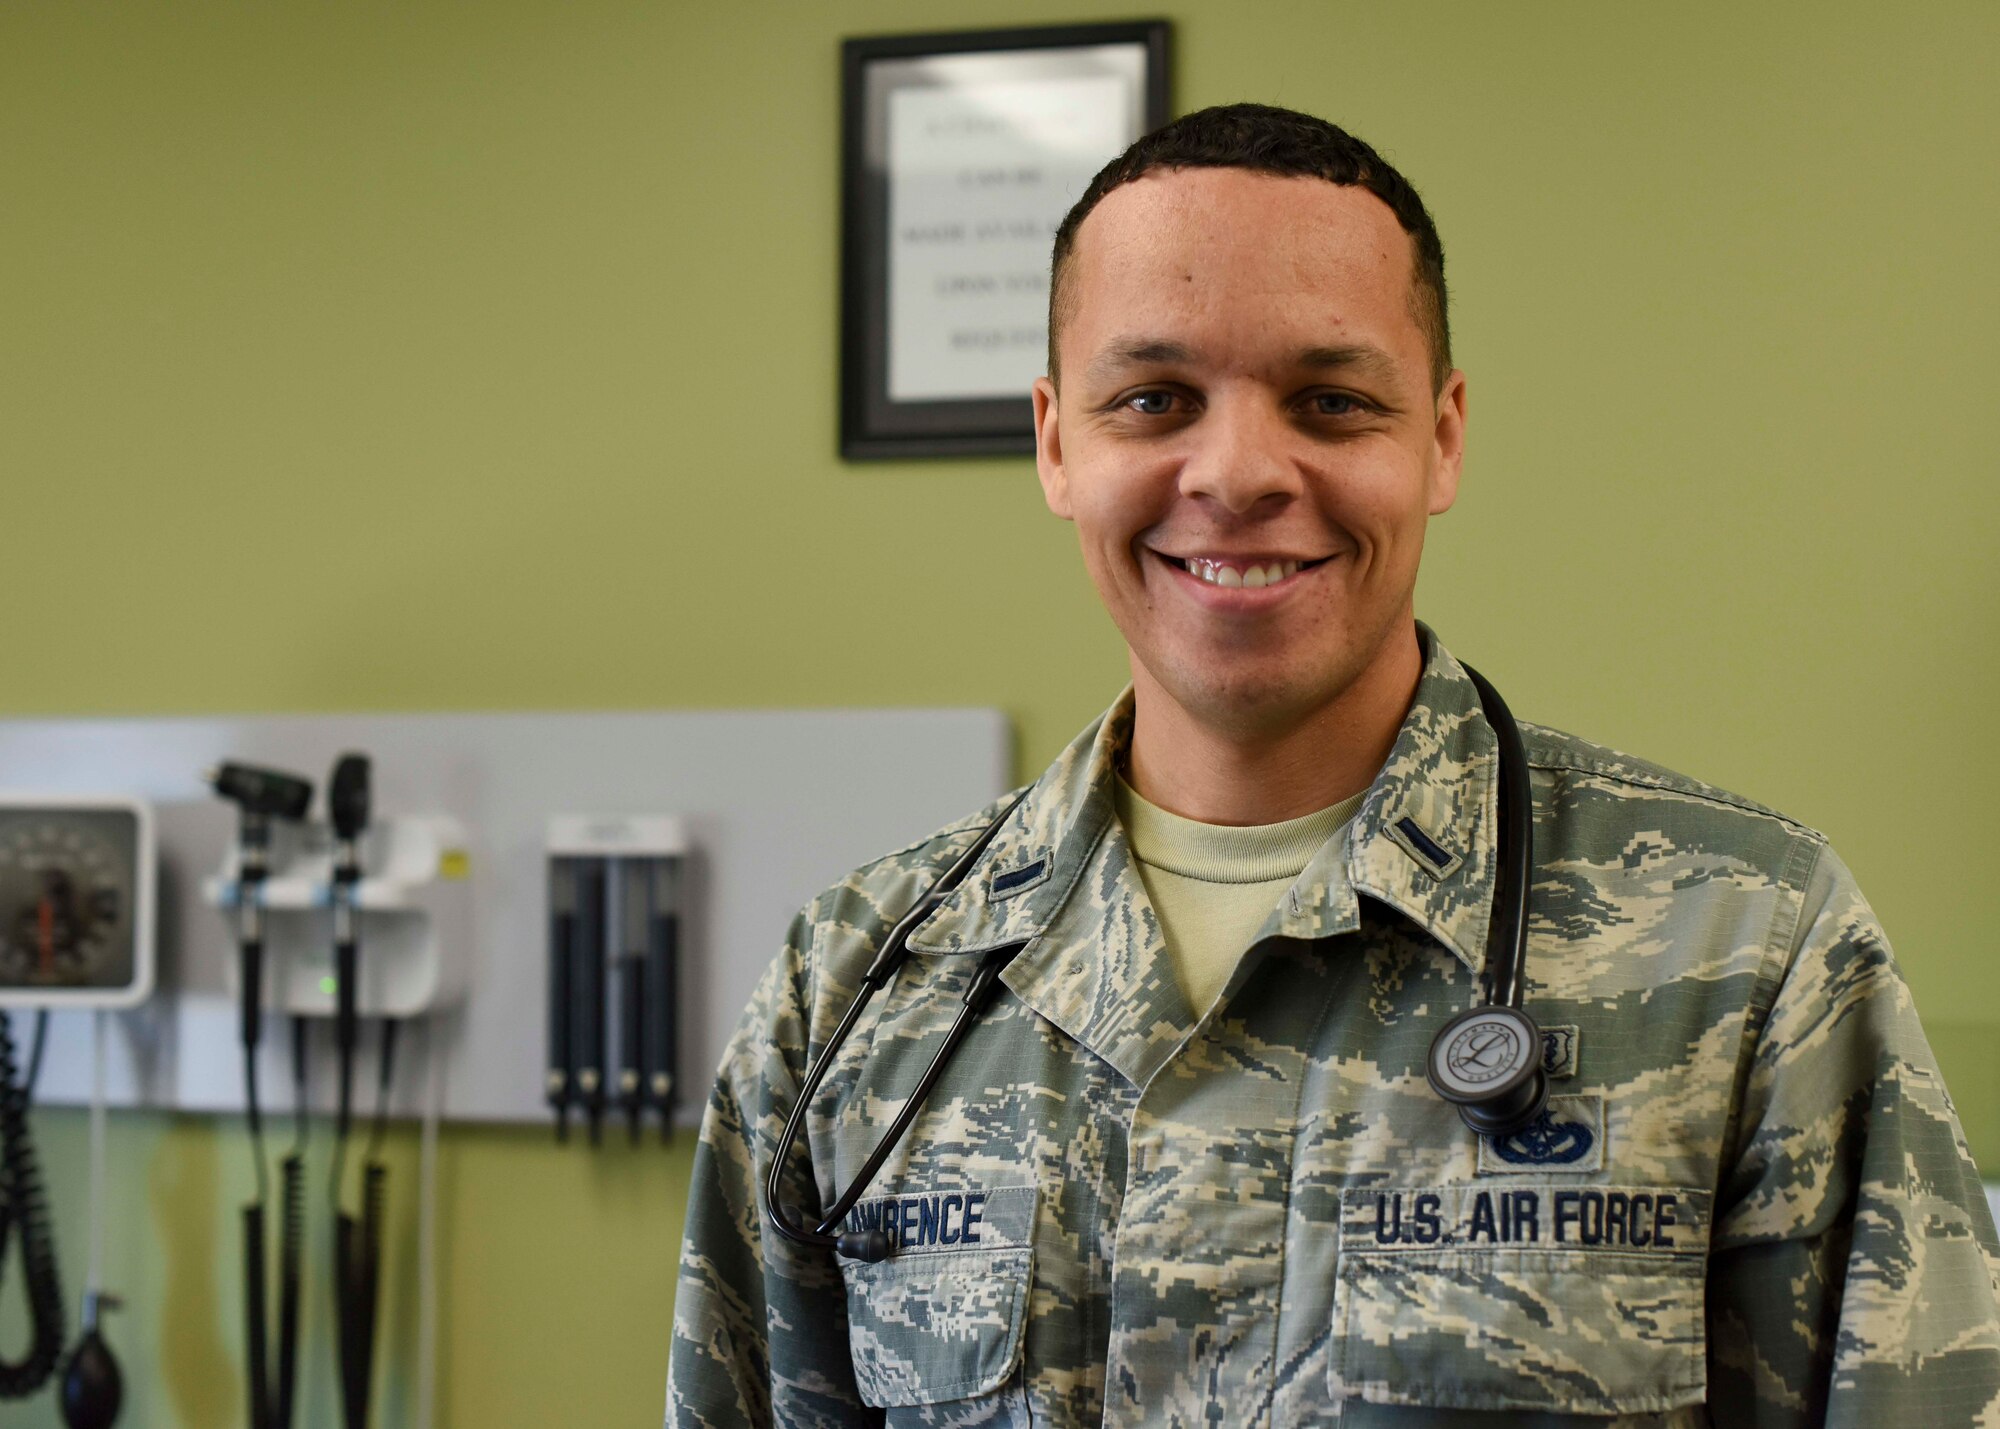 1st Lt. Matthew Lawrence, 49th Medical Group Physician Assistant, poses for a photo, Jan. 24, 2019, on Holloman Air Force Base, N.M. Lawrence works in the 49th MDG Family Medicine clinic and treats upwards of 20 patients a day. (U.S. Air Force photo by Staff Sgt. BreeAnn Sachs)